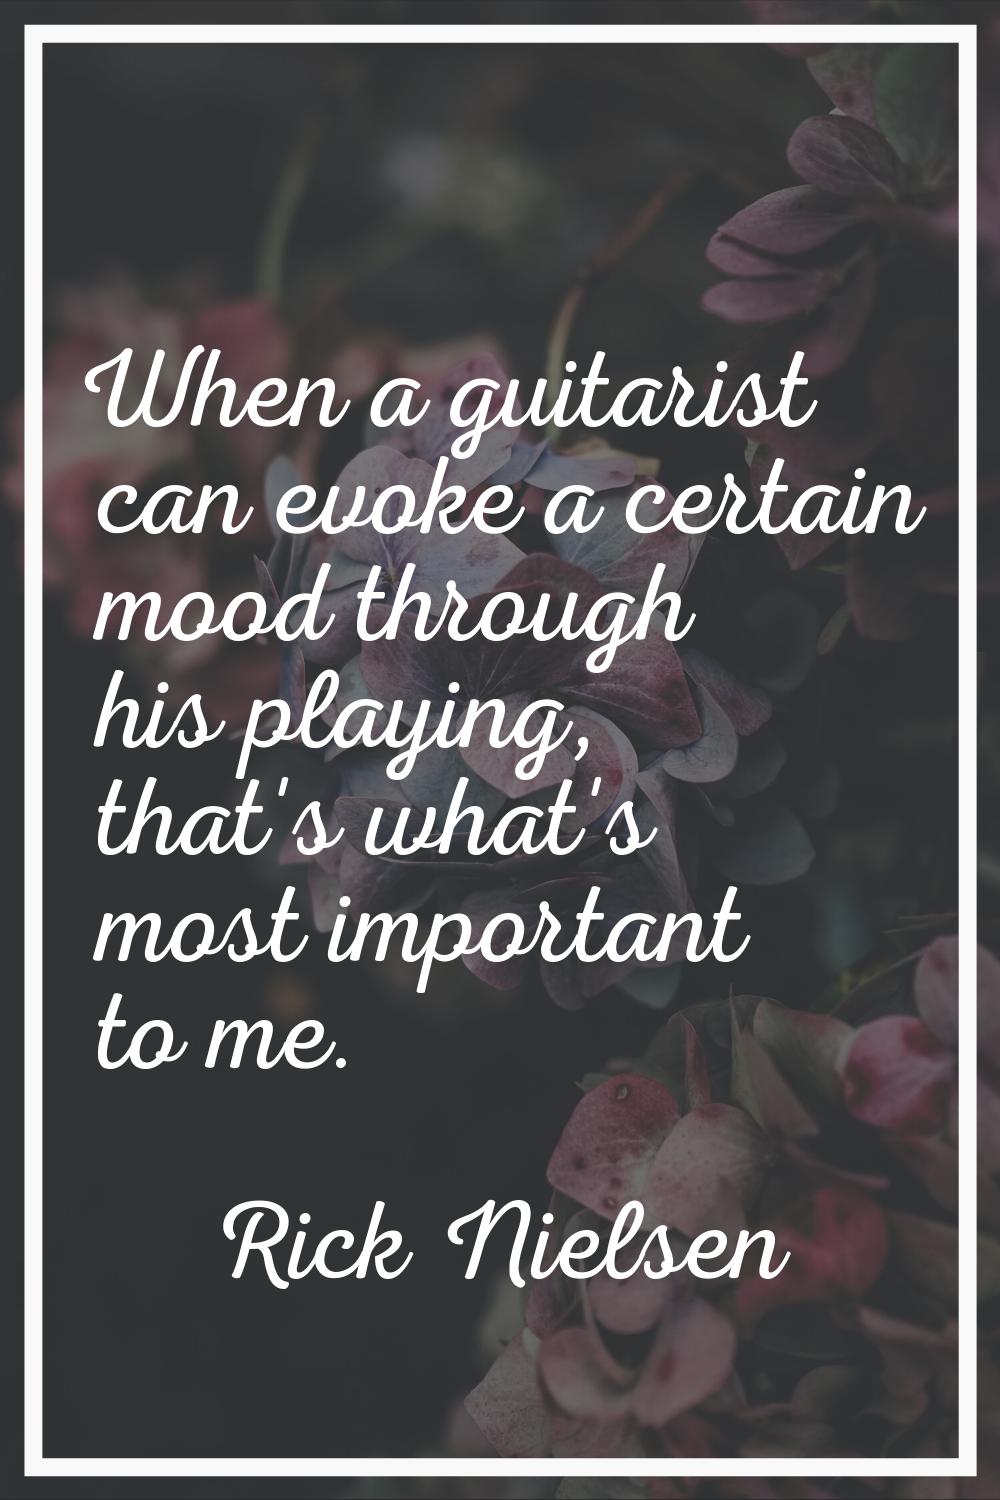 When a guitarist can evoke a certain mood through his playing, that's what's most important to me.